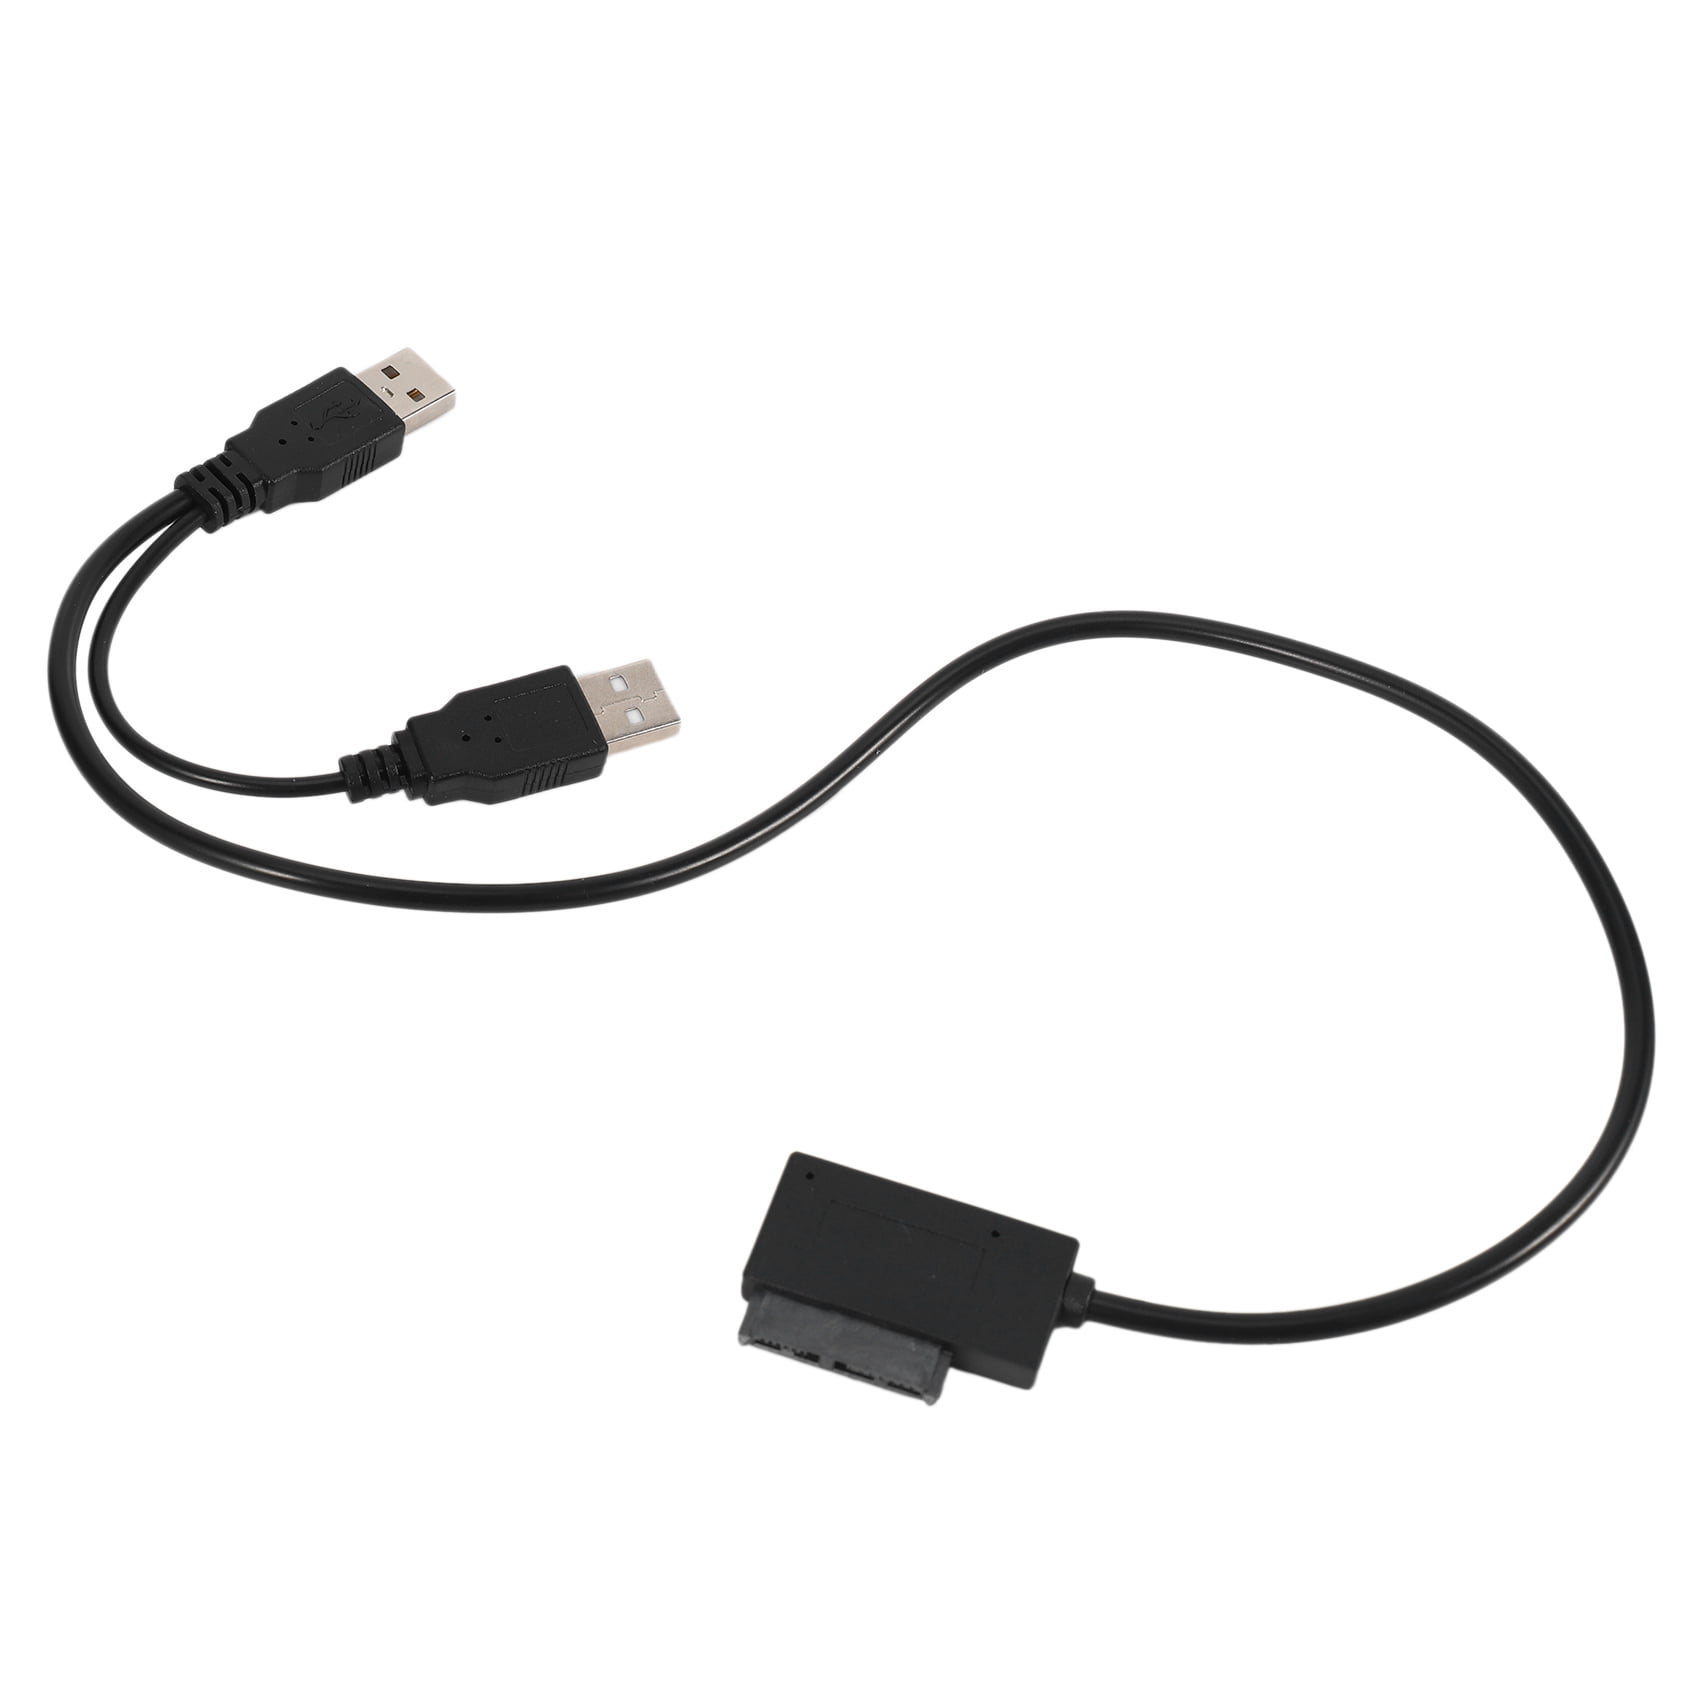 Slim SATA Cable USB 2.0 To 7+6 External Power For Laptop SATA Adapter